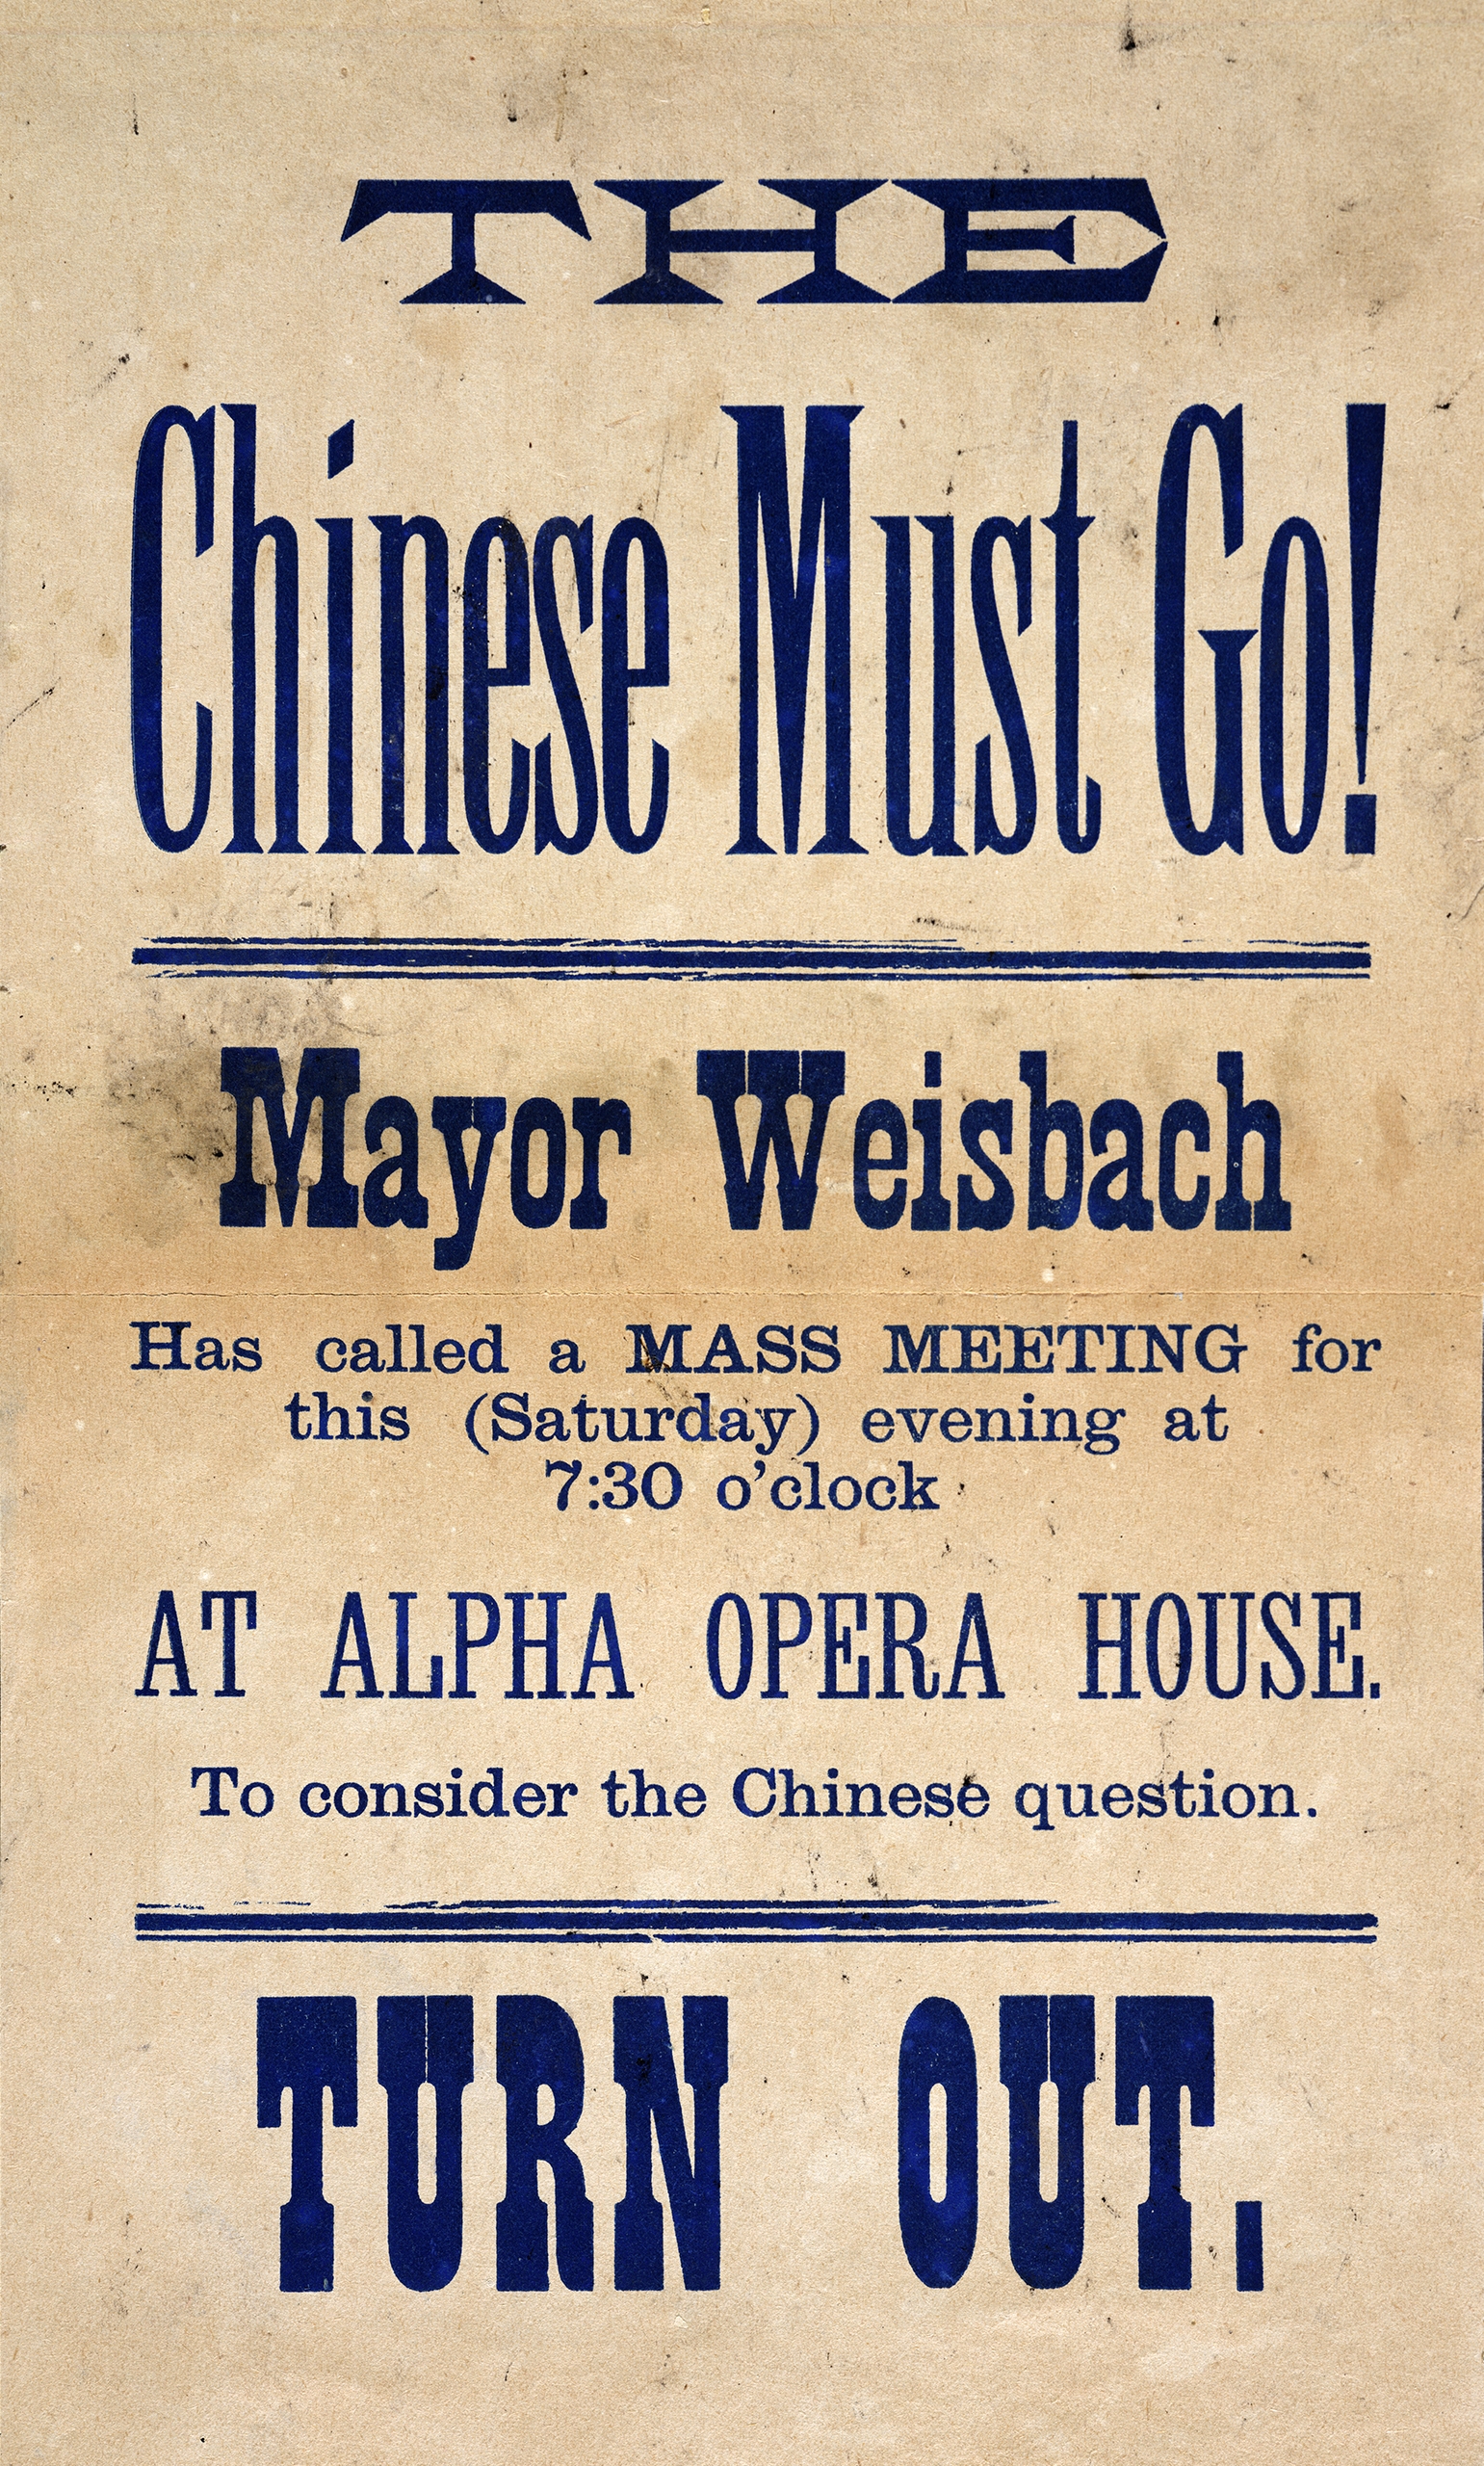 Following a massacre of Chinese miners in the Wyoming Territory in 1885, cities throughout the West organized to harass and expel Chinese immigrants. This broadside advertises an anti-Chinese rally in Tacoma, Washington.